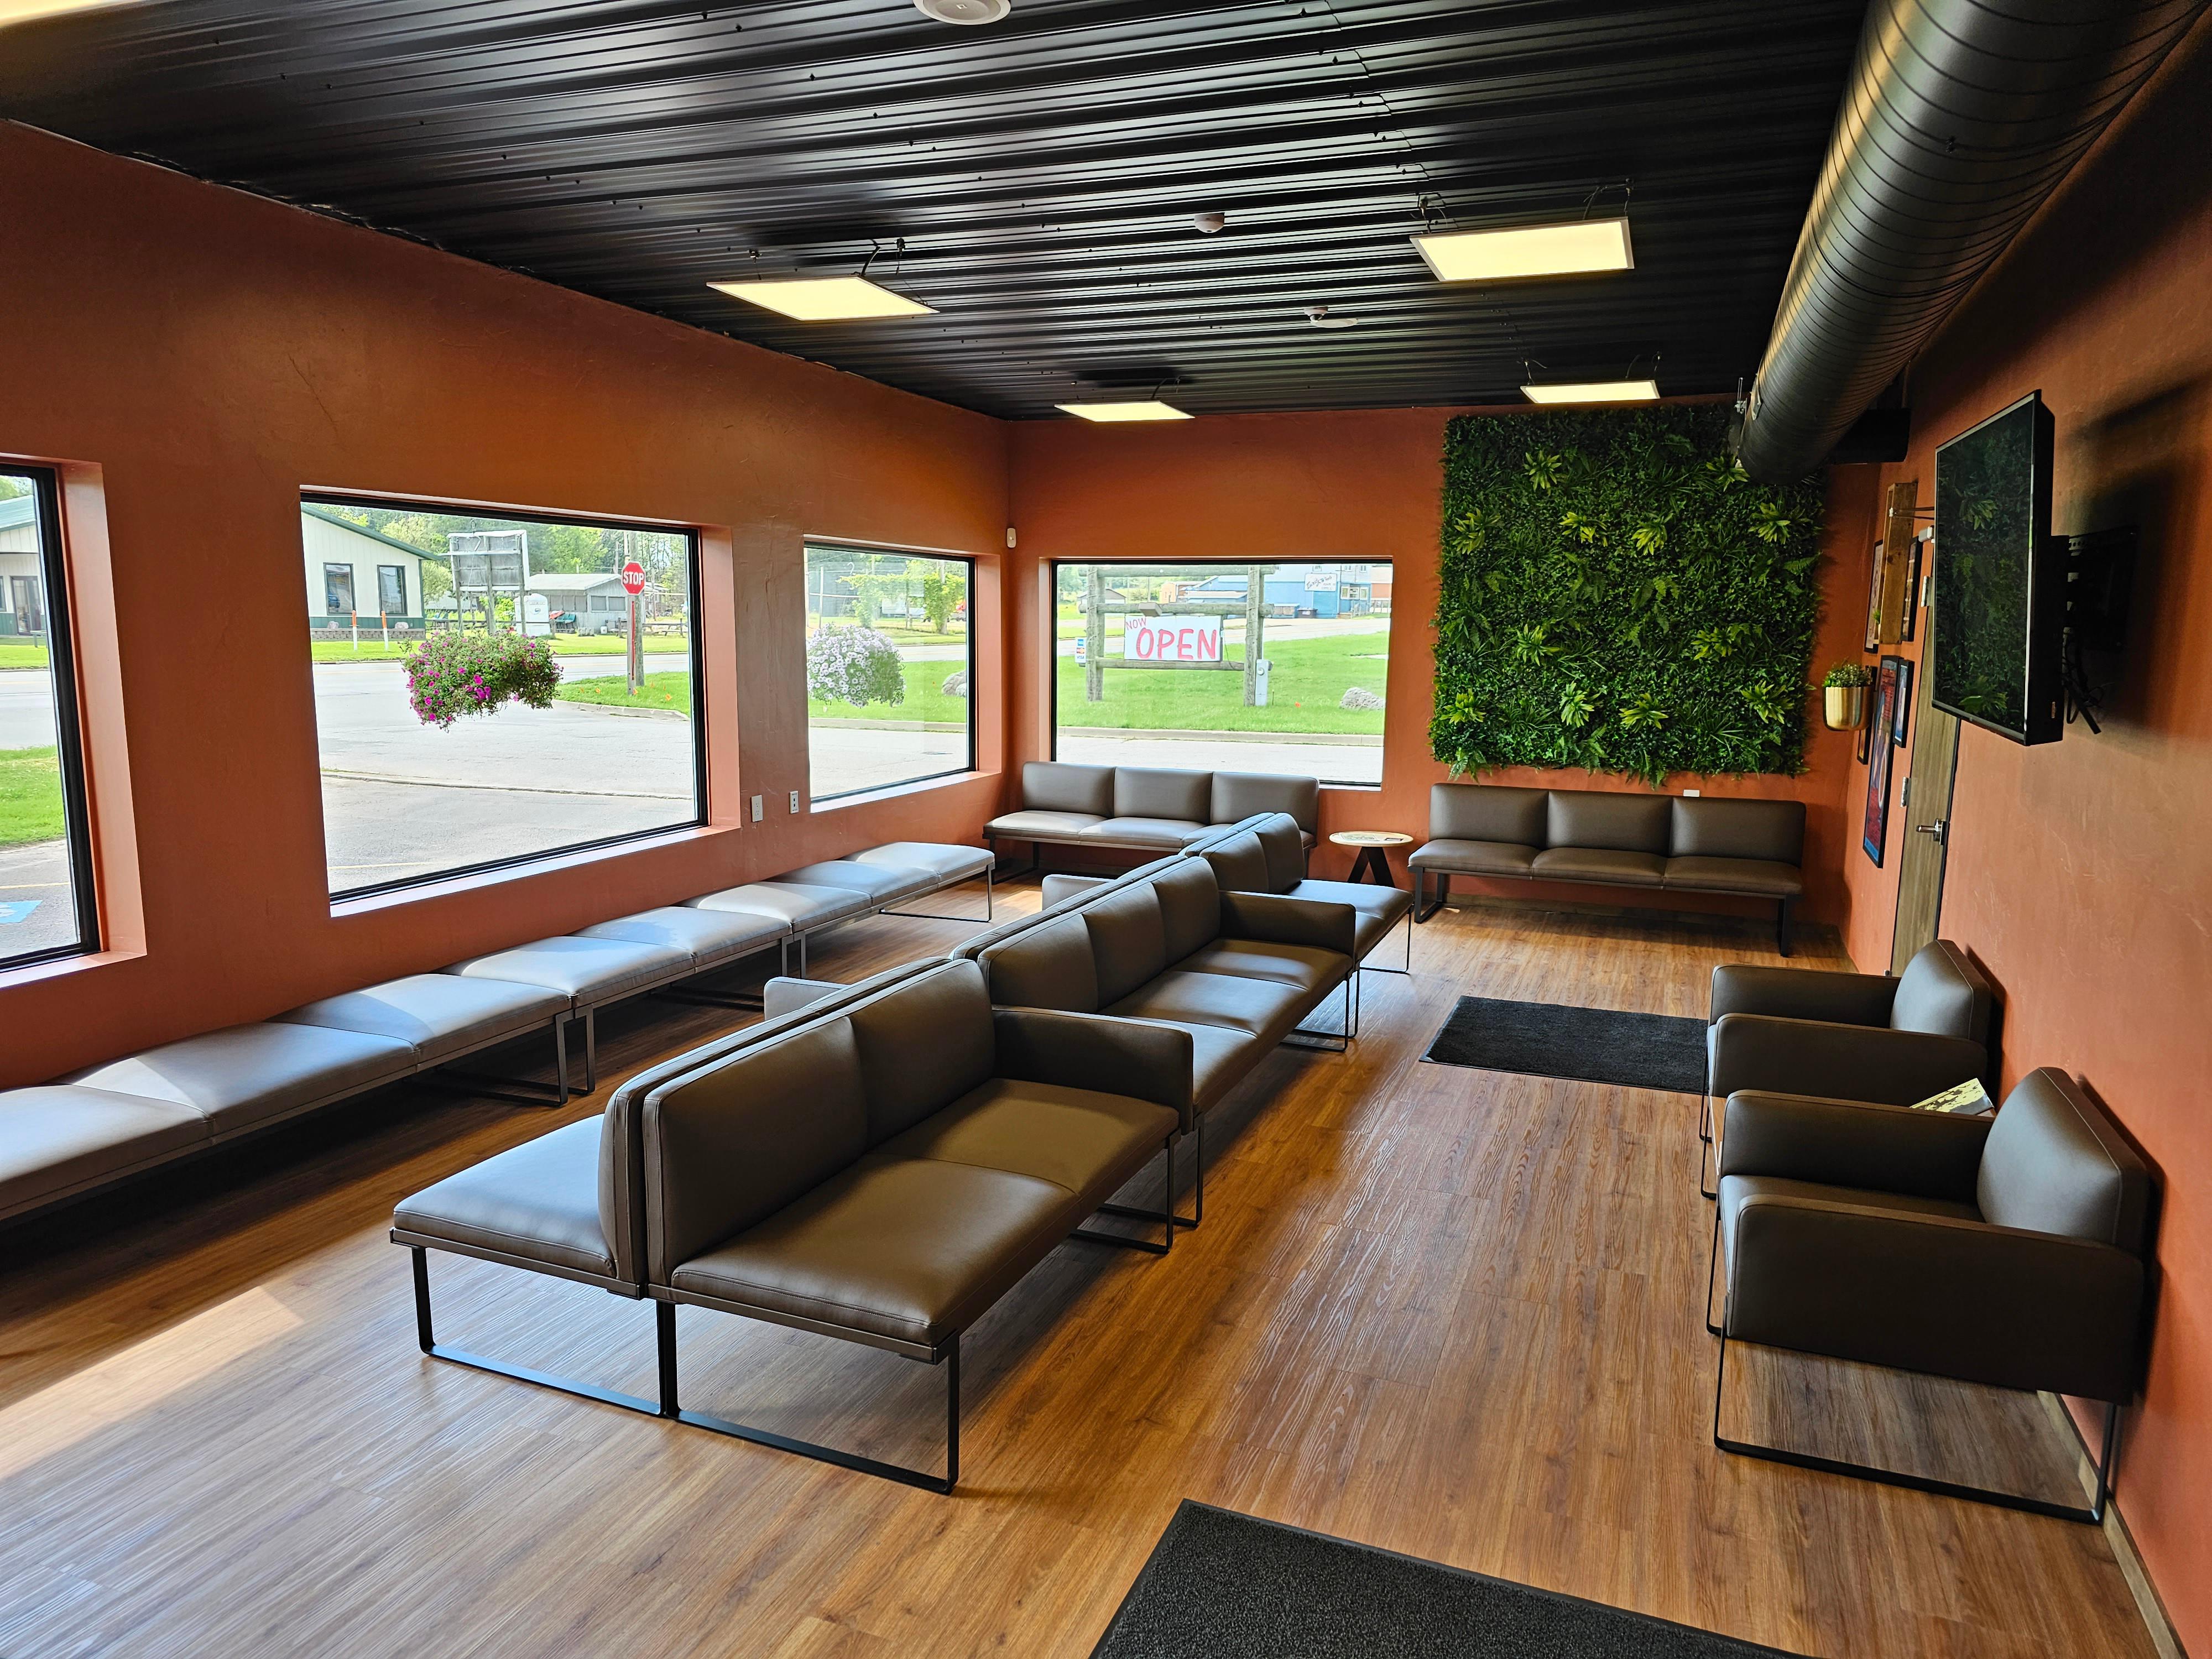 Explore our Weed Dispensary in Norway, MI: Find Higher Love